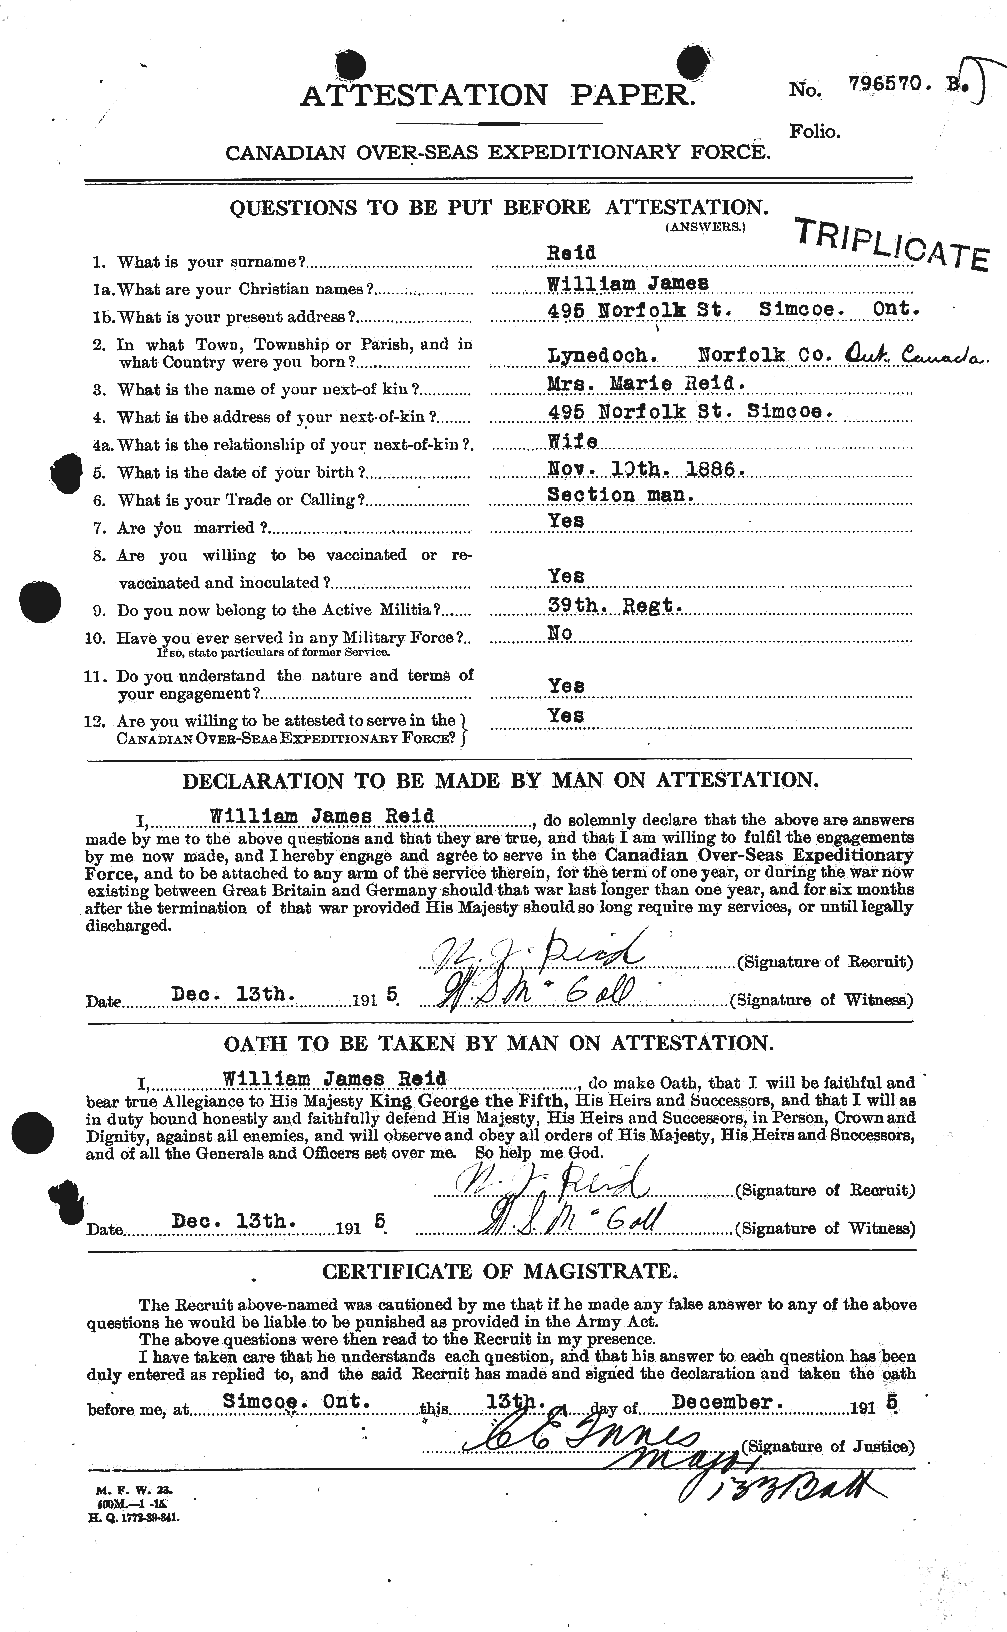 Personnel Records of the First World War - CEF 597010a